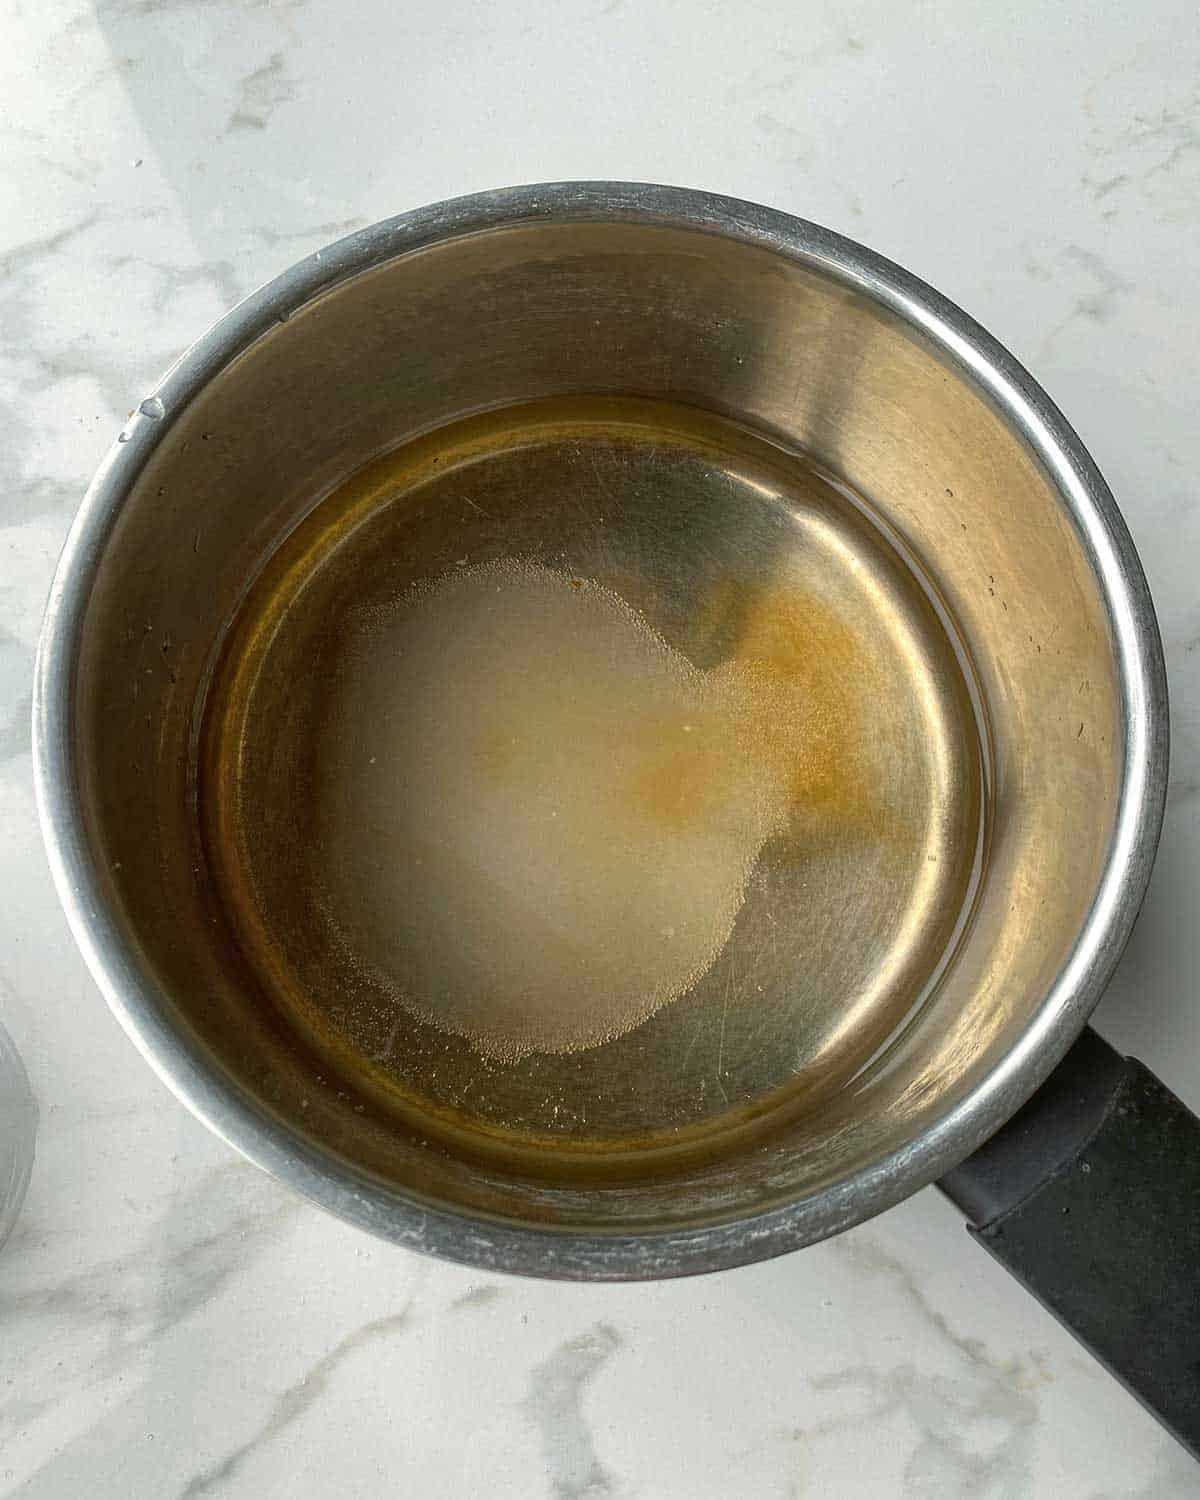 Water syrup and sugar in a saucepan.